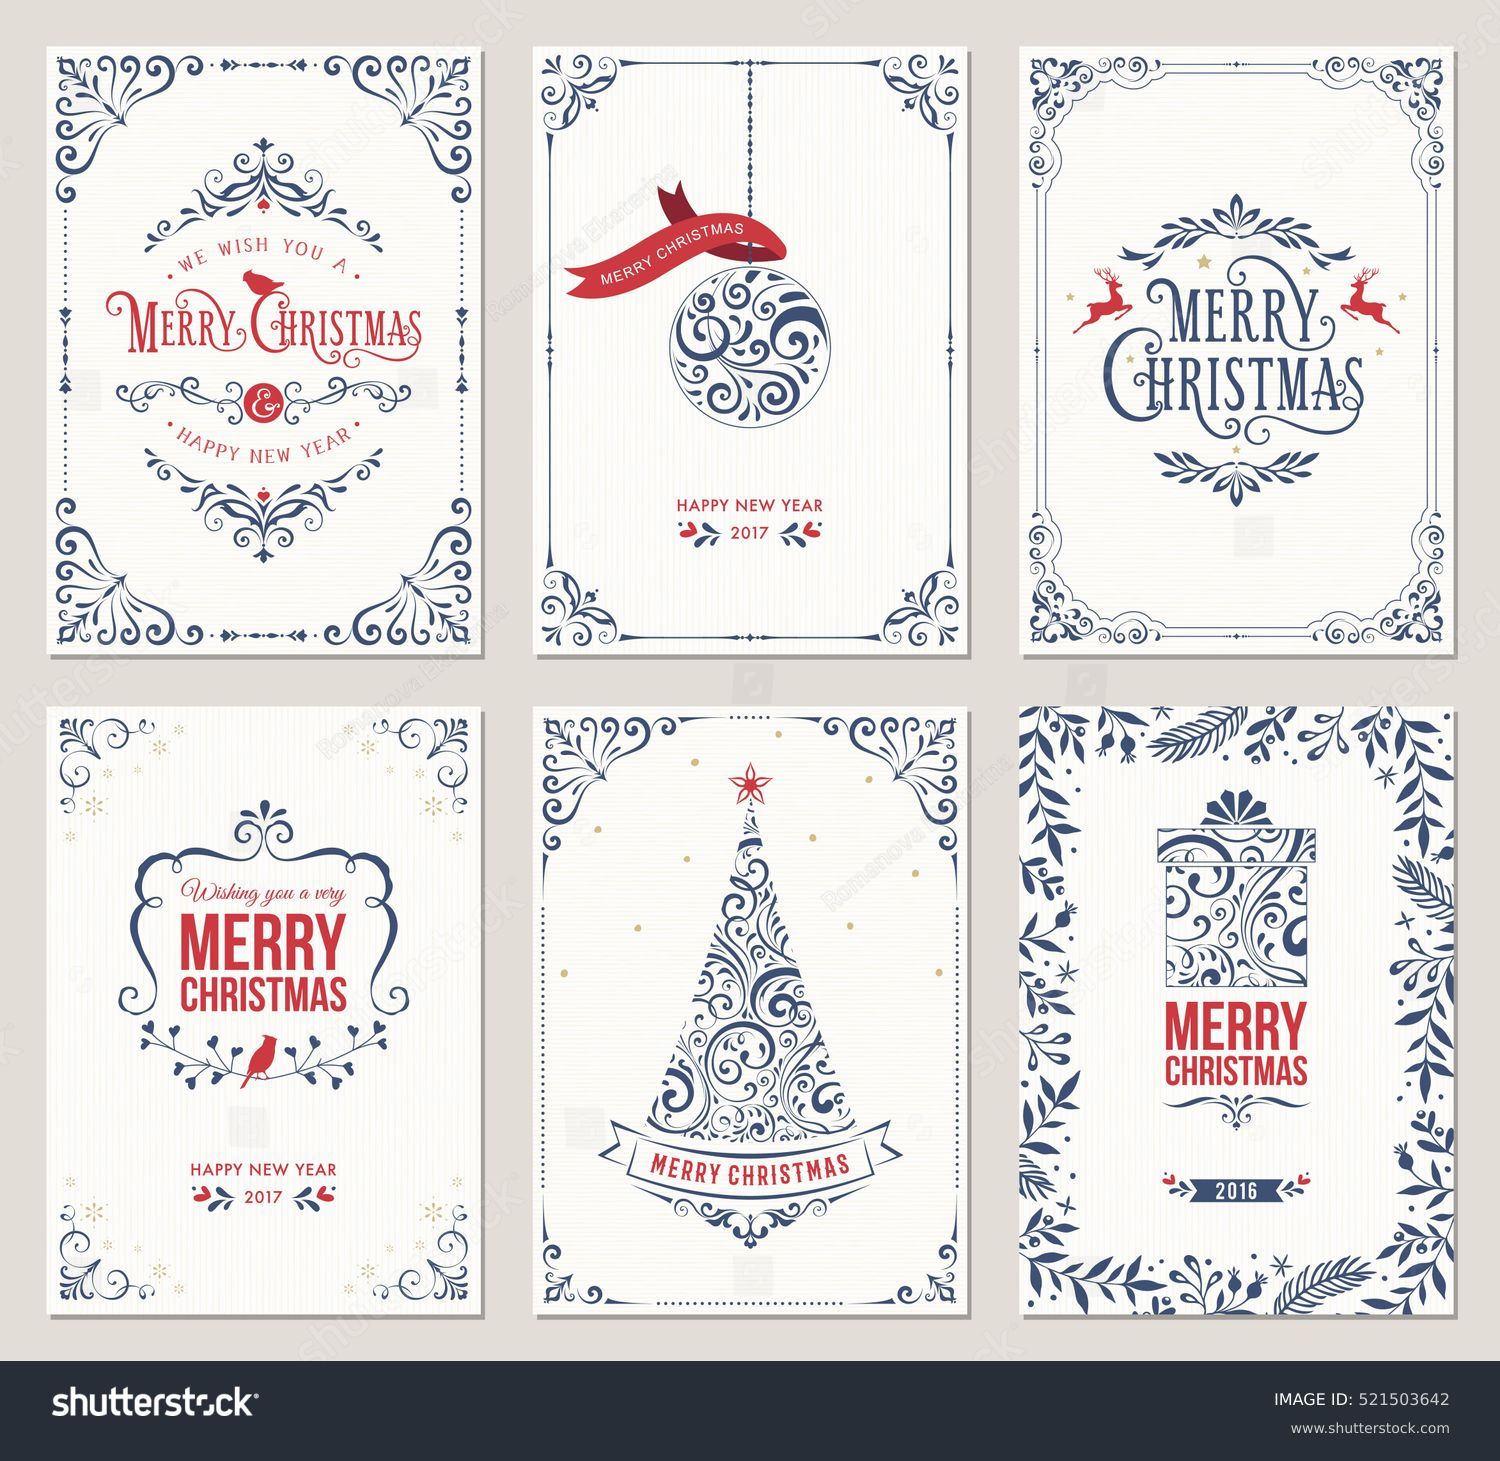 Ornate vertical winter holidays greeting cards with New Year tree, gift box, Christmas ornaments and typographic design.Vector illustration. #521503642